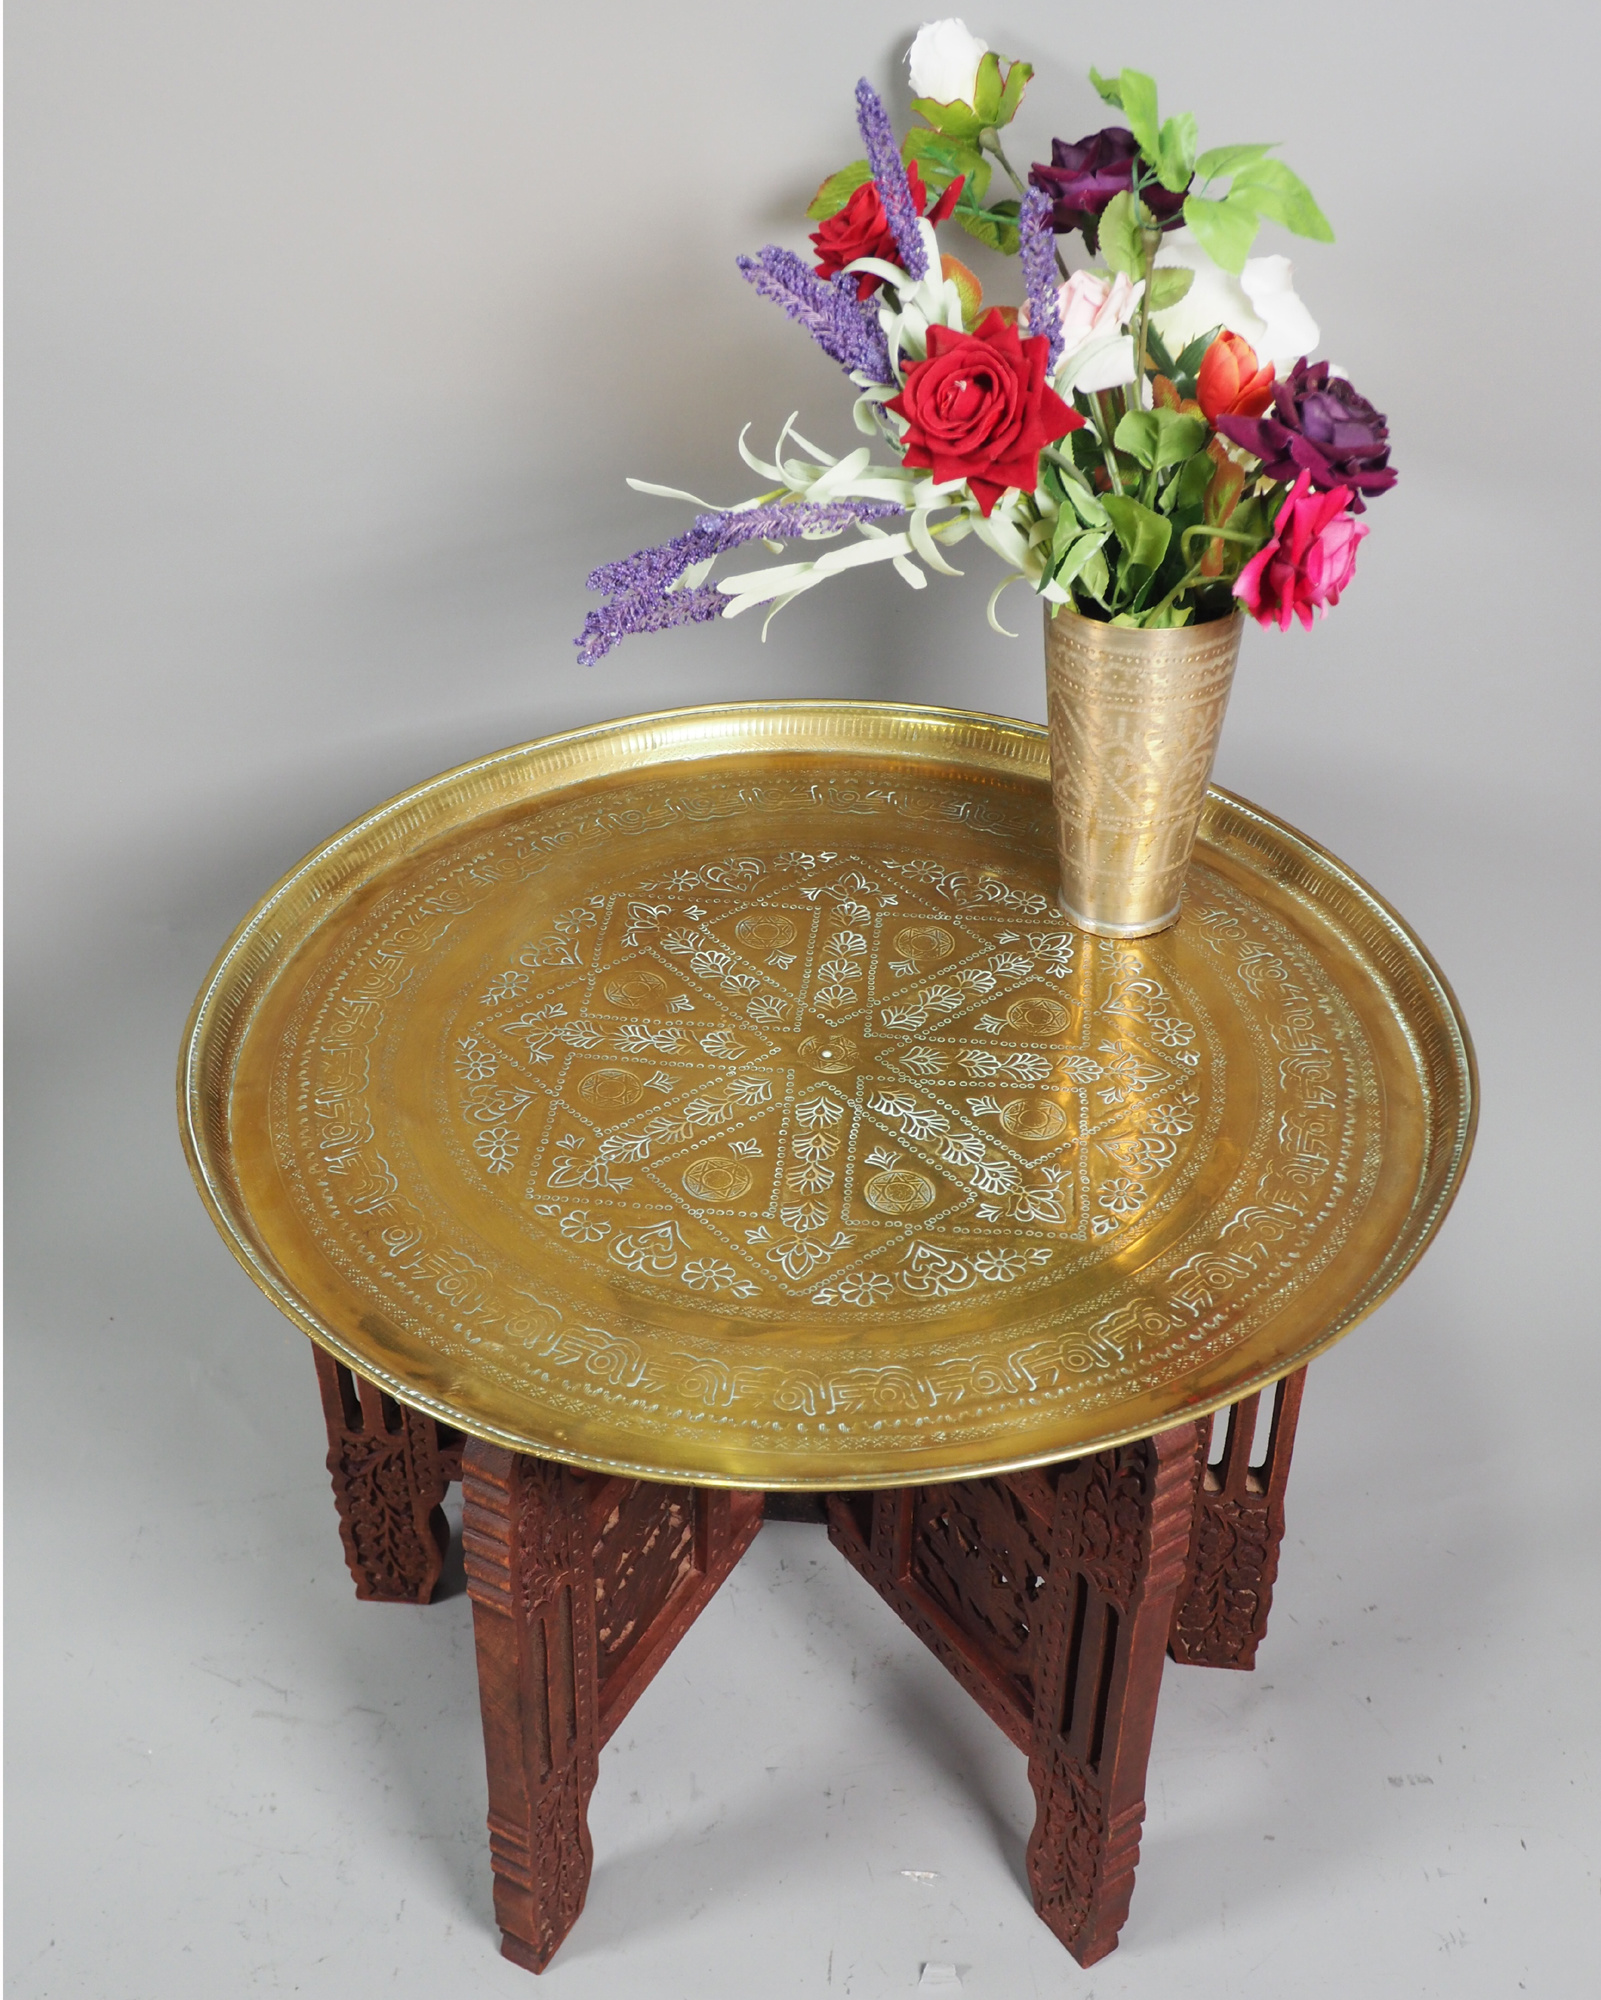 58 cm Ø  Antique ottoman orient Islamic  Hammer Engraved Brass table Tea table side table Tray from Afghanistan  No-HH - 7